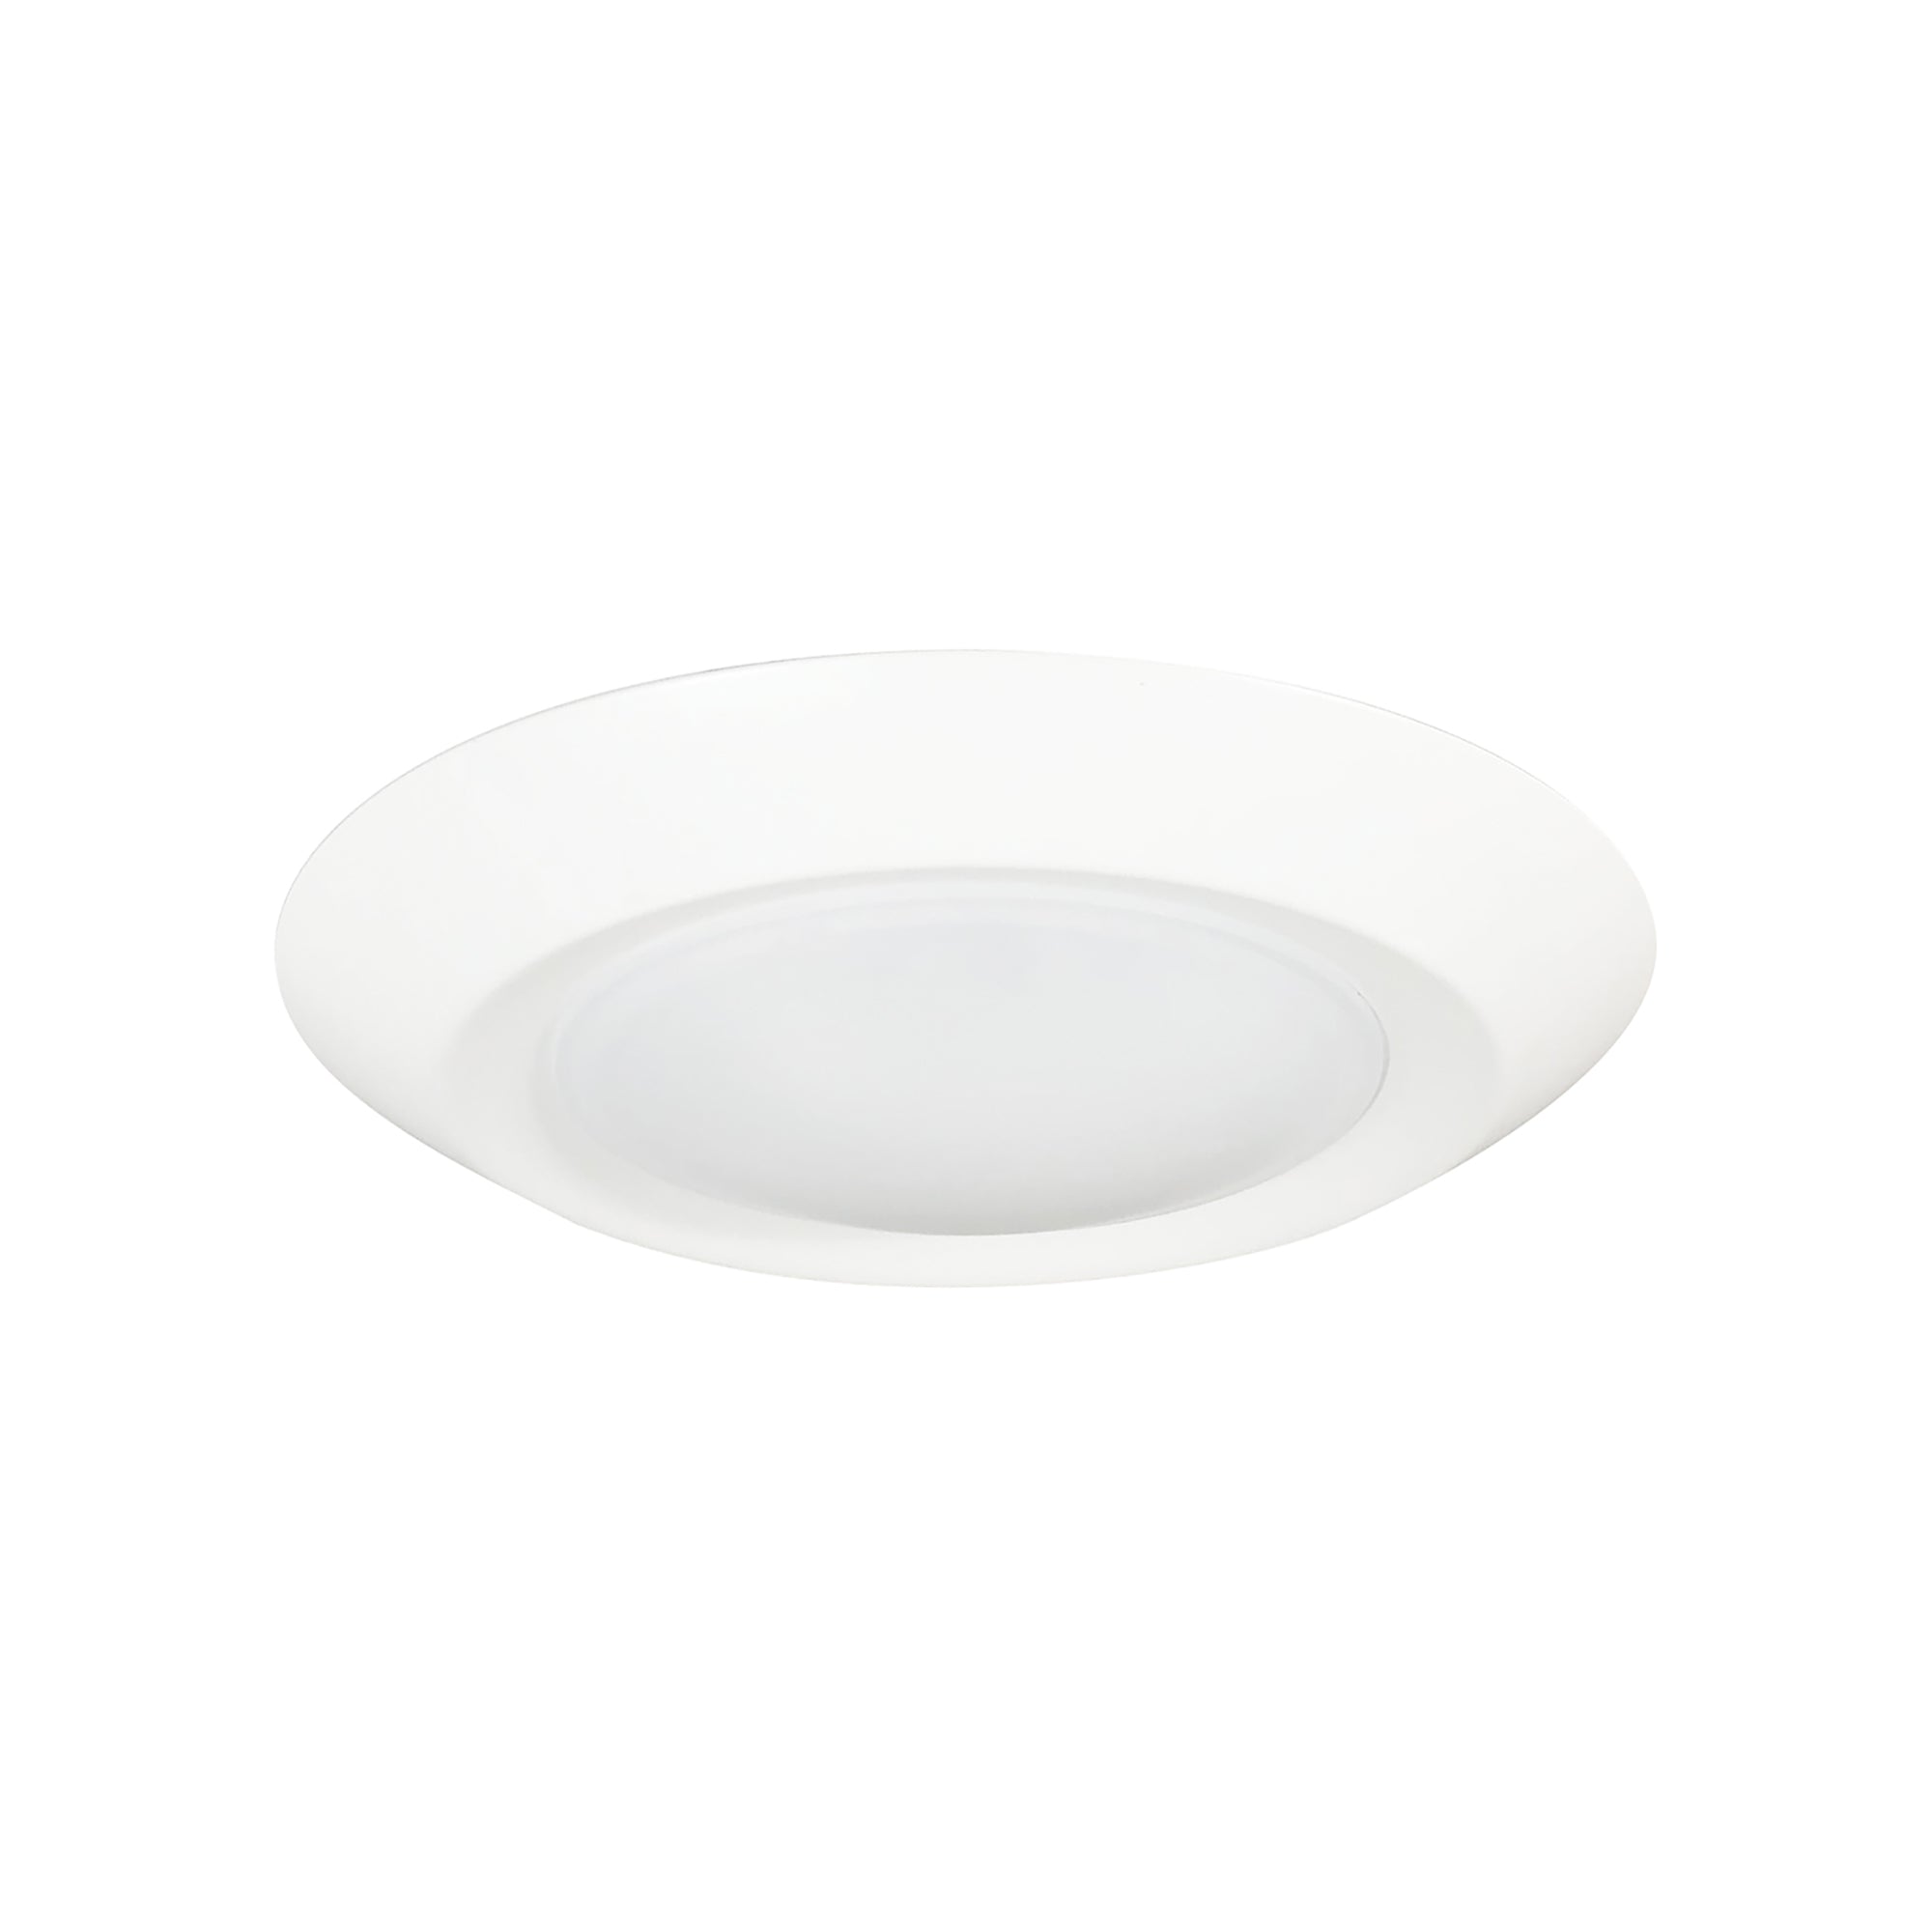 Nora Lighting NLOPAC-R6REGT2440W - Surface - 6 Inch Regressed AC Opal LED Surface Mount, 950lm / 13W, 4000K, White finish